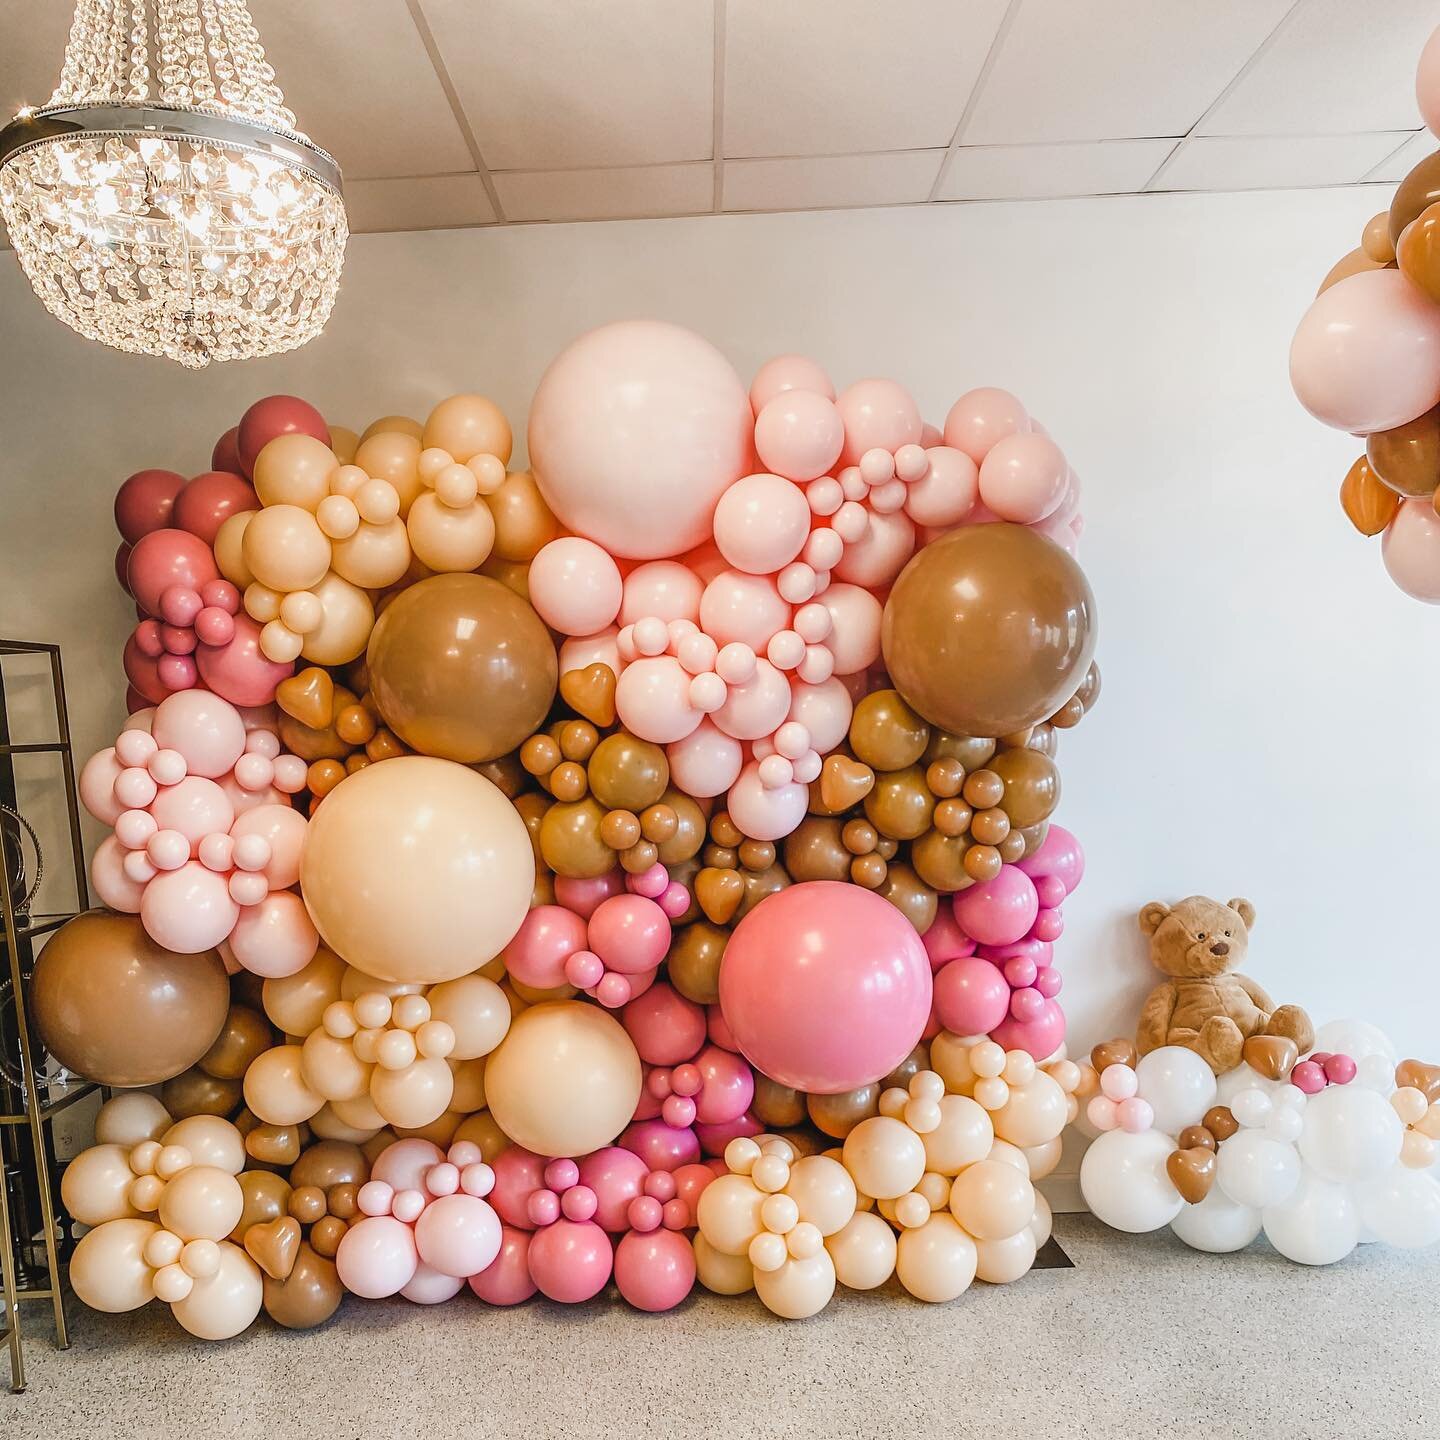 Teddy bears and pink for this virtual baby shower💕 🧸 So adorable! 

Book the look 
www.Babaloonz.com
601-706-9010

#mississippiballoonartist #babaloonz #birthdaygarland #organicballoonarch #staircasegarland #2021 #birthdayparty #smallbusinessowner 